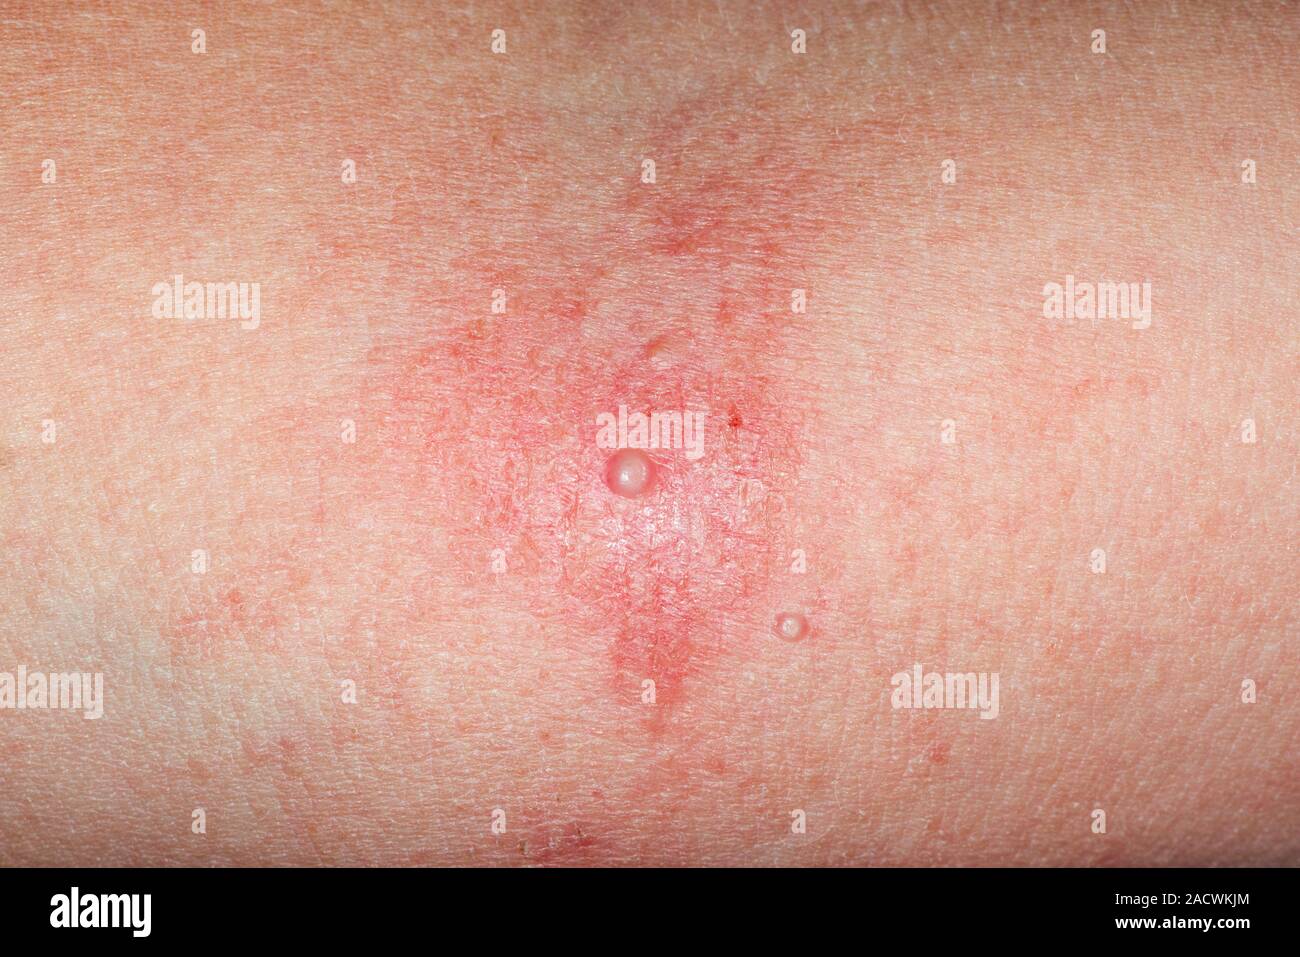 Molluscum contagiosum and eczema. Eczema rash (red) on a 6 year old male patient caused by a molluscum contagiosum infection (blisters). This conditio Stock Photo